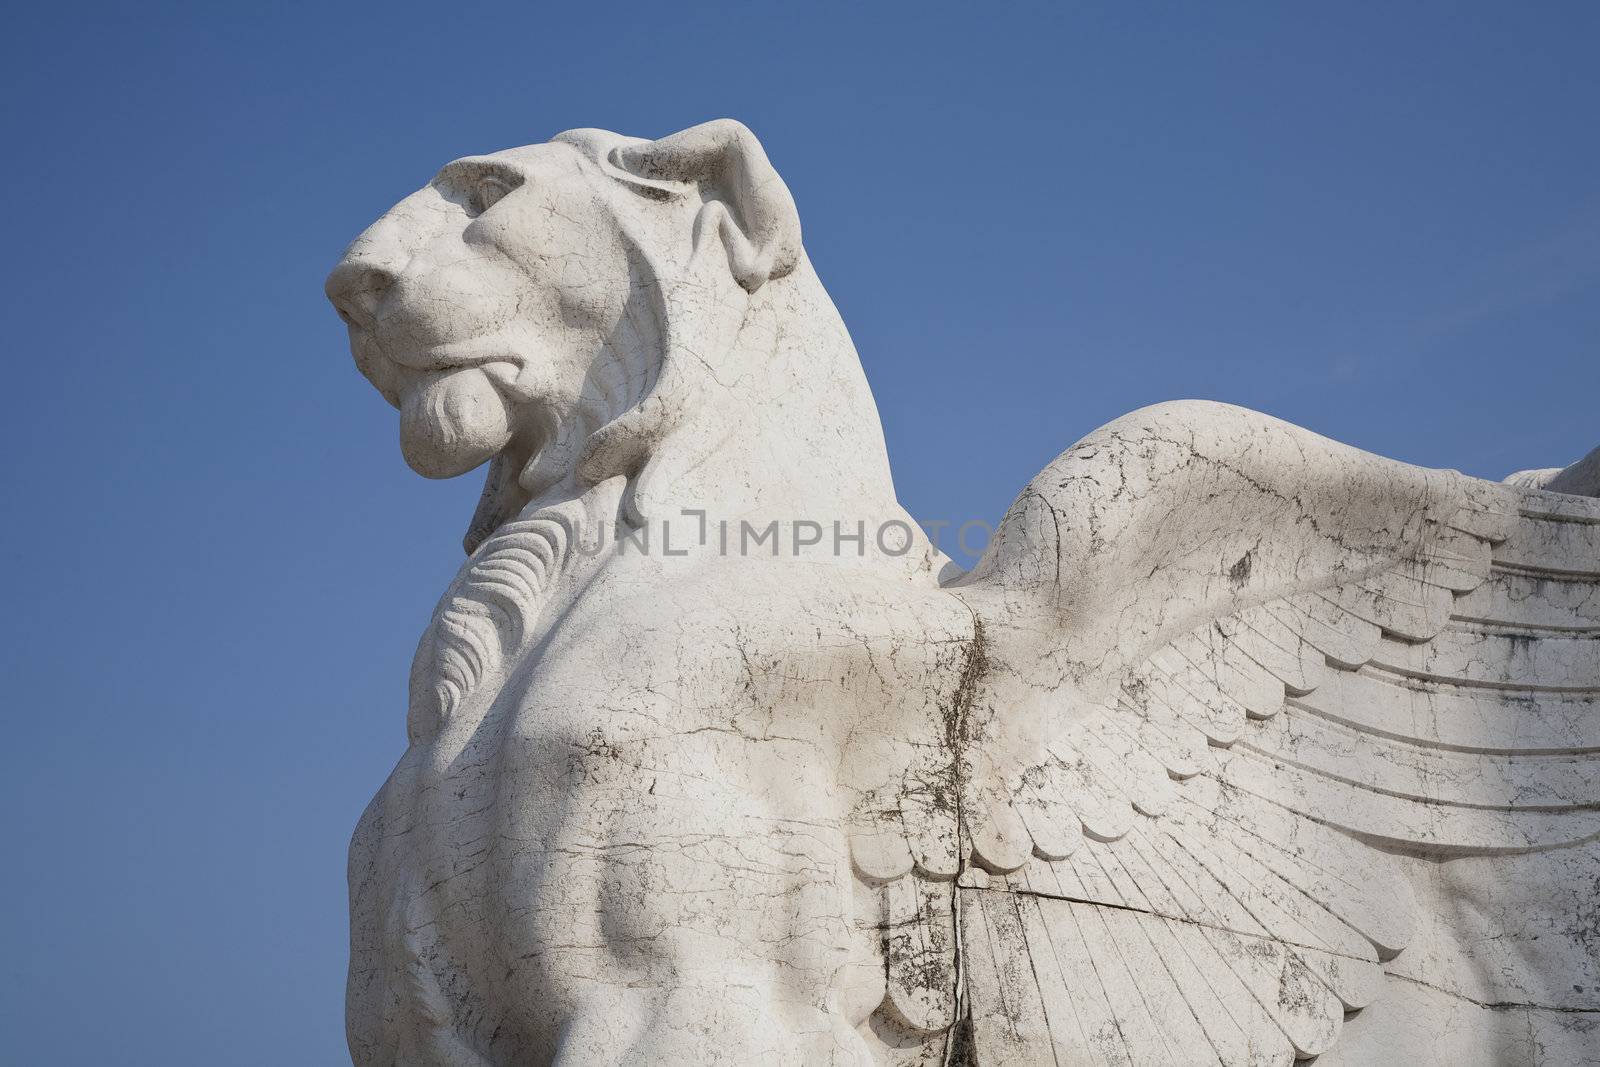 Winged lion seen against the blue sky - a detail of the Victor Emmanuel monument at Piazza Venezia -  Rome, Italy. Build after a design by Giuseppe Sacconi as a tribute to the first king of united Italy - Victor Emmanuel II.